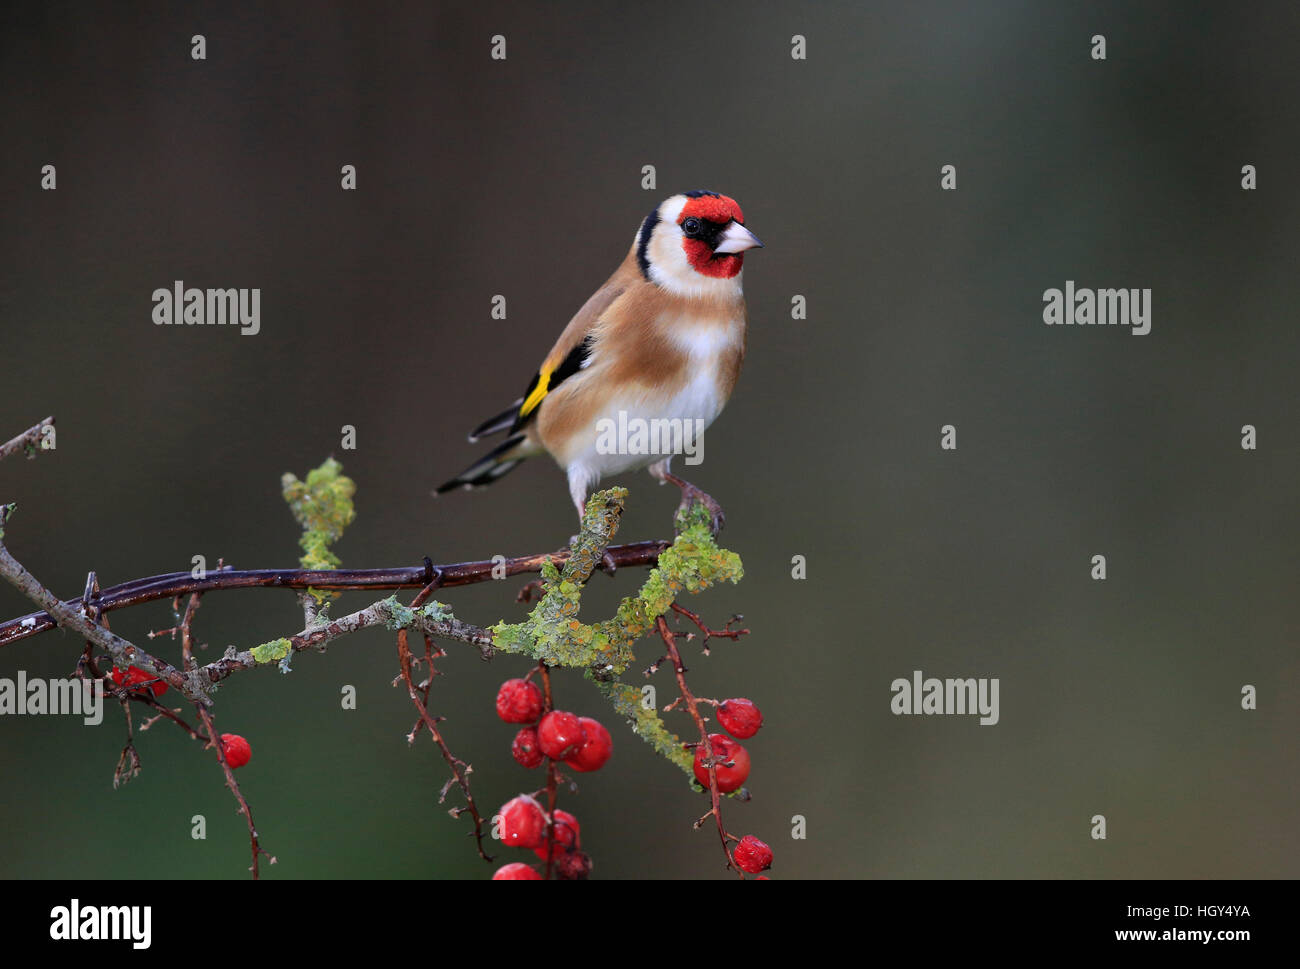 Goldfinch on a branch with berries Stock Photo